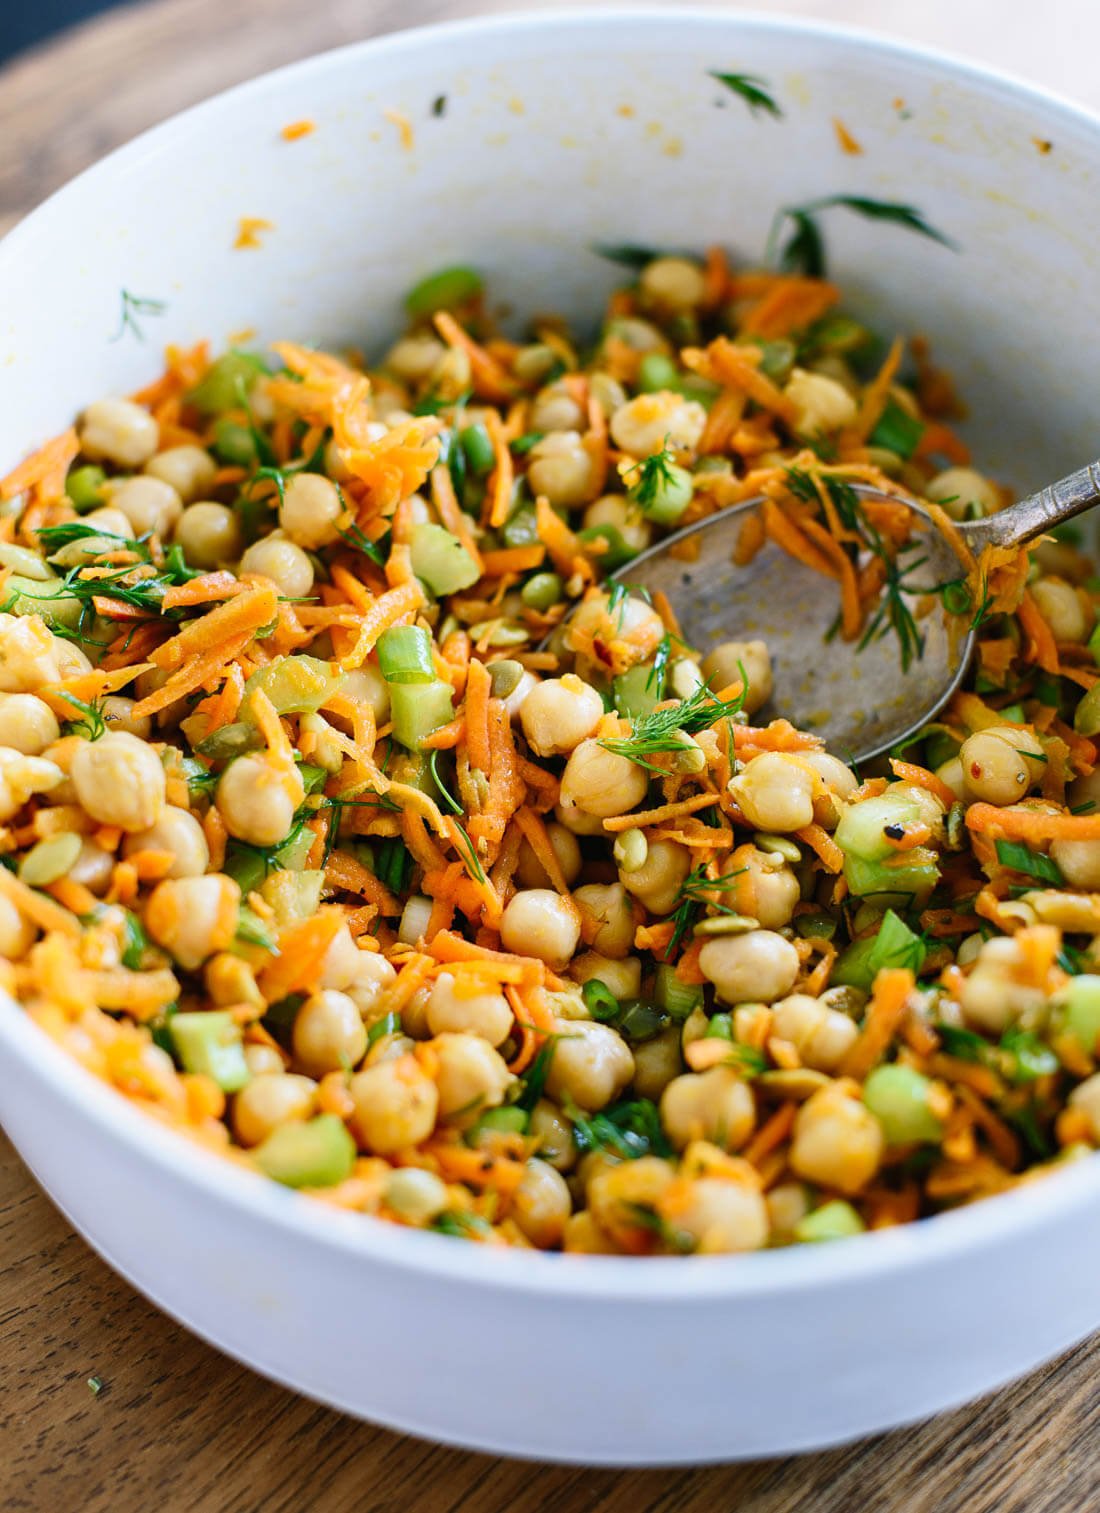 My favorite chickpea salad recipe with carrots, dill and celery. So easy to make! cookieandkate.com